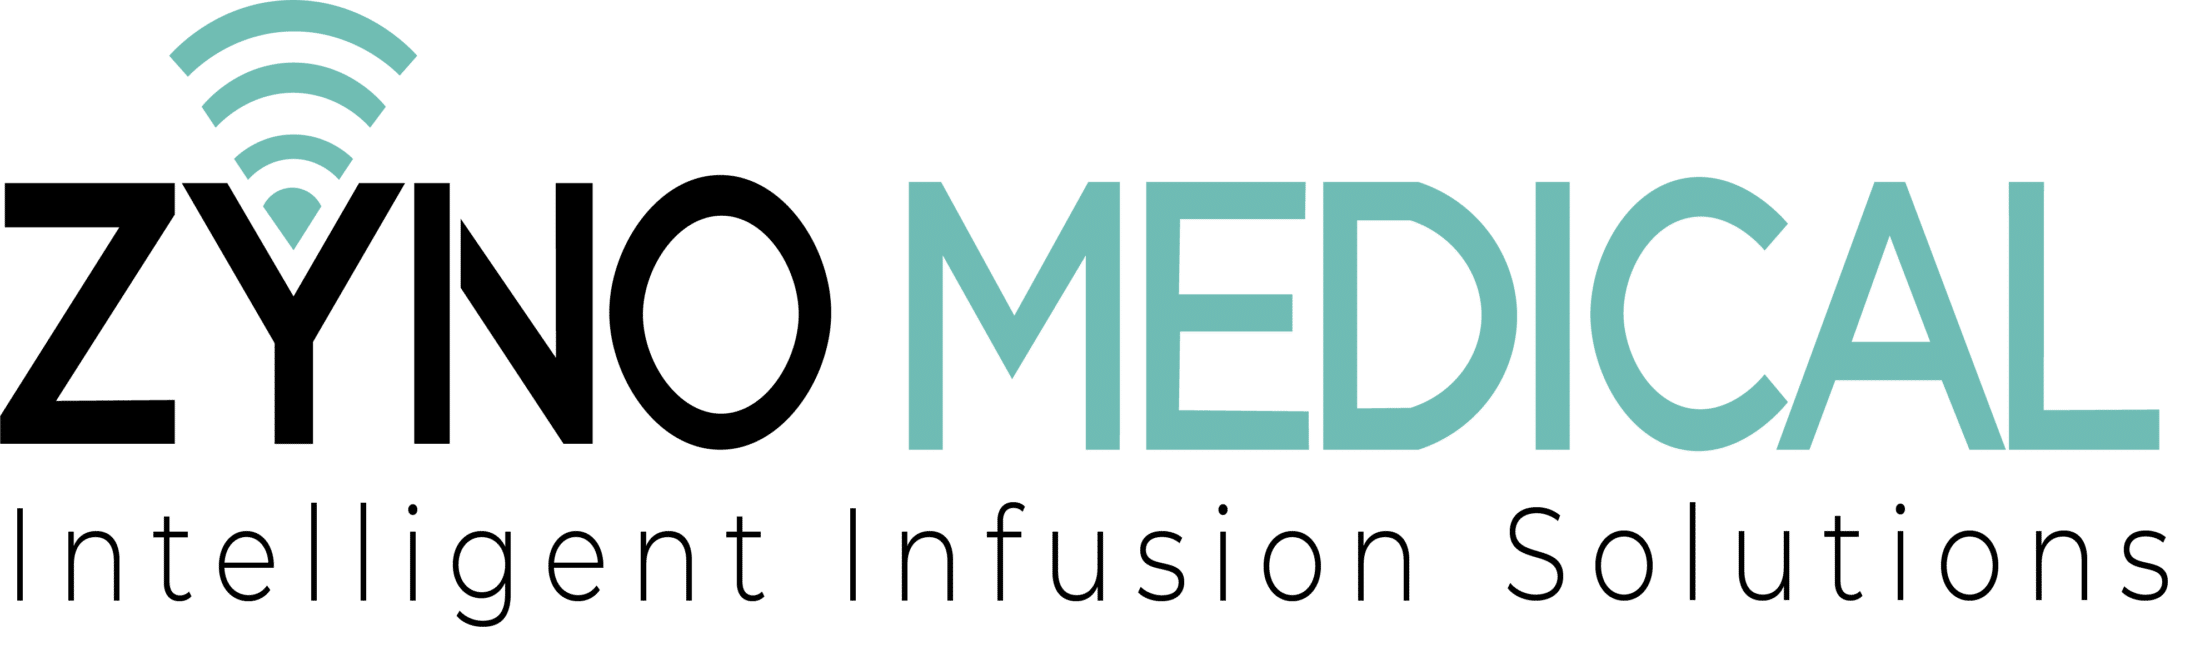 Zyno Medical (infusion solutions)